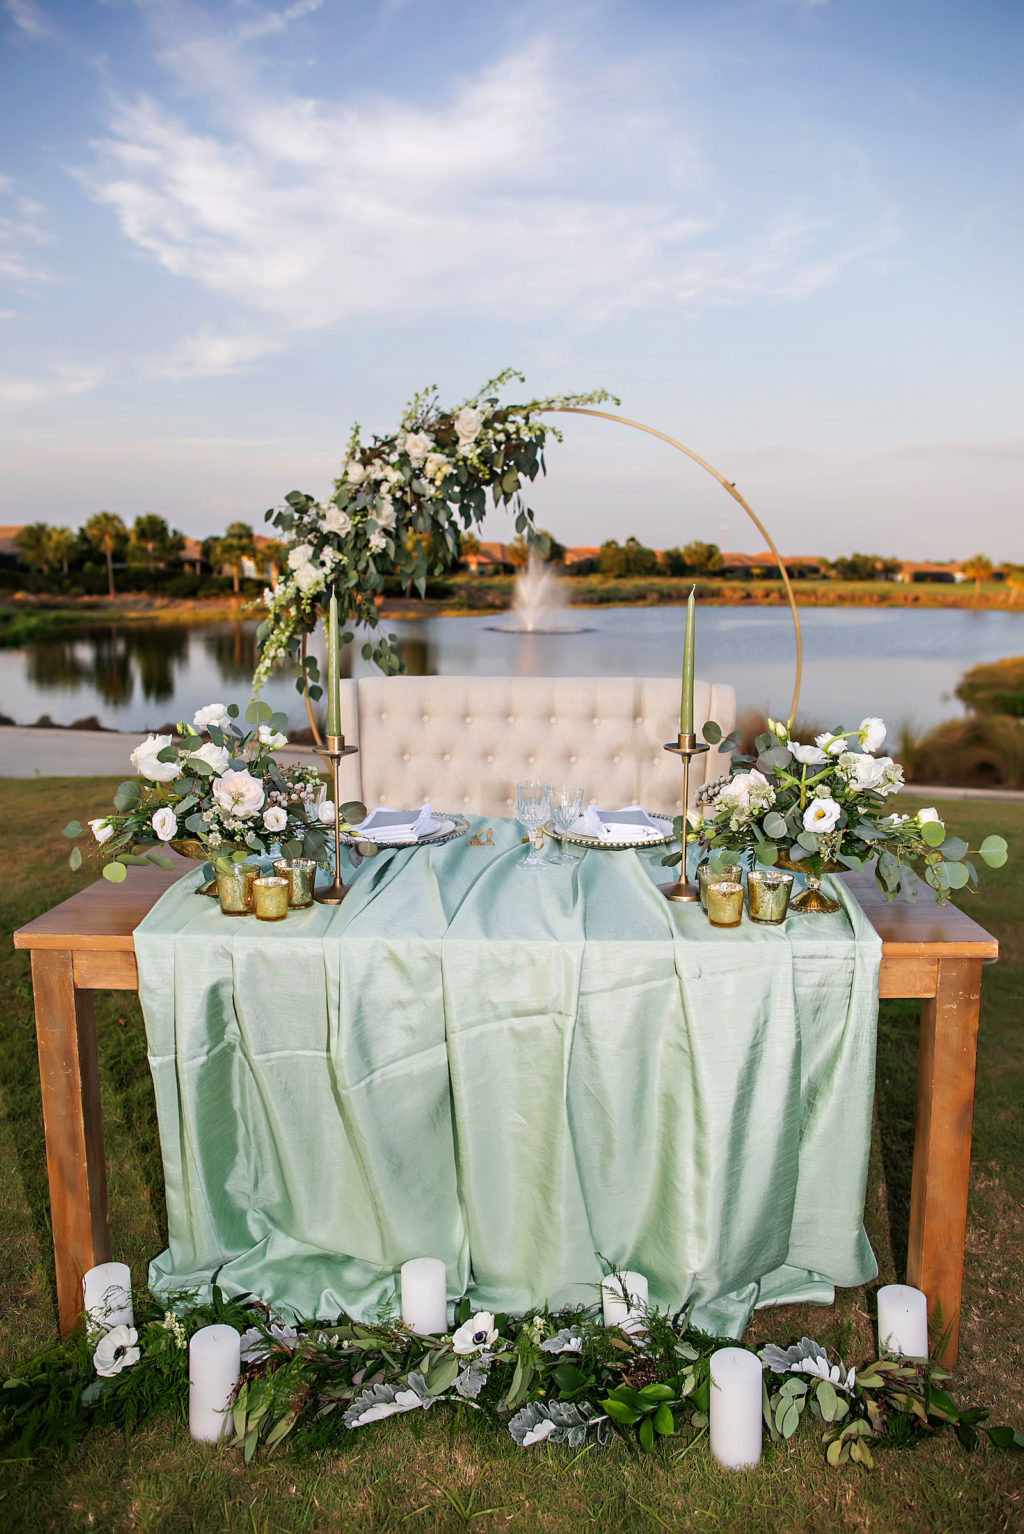 Outdoor Romantic Wedding Sweetheart Table Decor, Wooden Table, Ivory Tufted Loveseat, Gold Round Metal Arch with Floral Arrangement, White Anemone and Roses, Greenery, Eucalyptus, Sage Green Table Linen, Gold Mercury Votives, Gold Candlesticks and Sage Green Candles | Tampa Bay Wedding Photographer Limelight Photography | Wedding Planner MDP Events | Wedding Florist Beneva Florals | Wedding Venue Esplanade Country Club